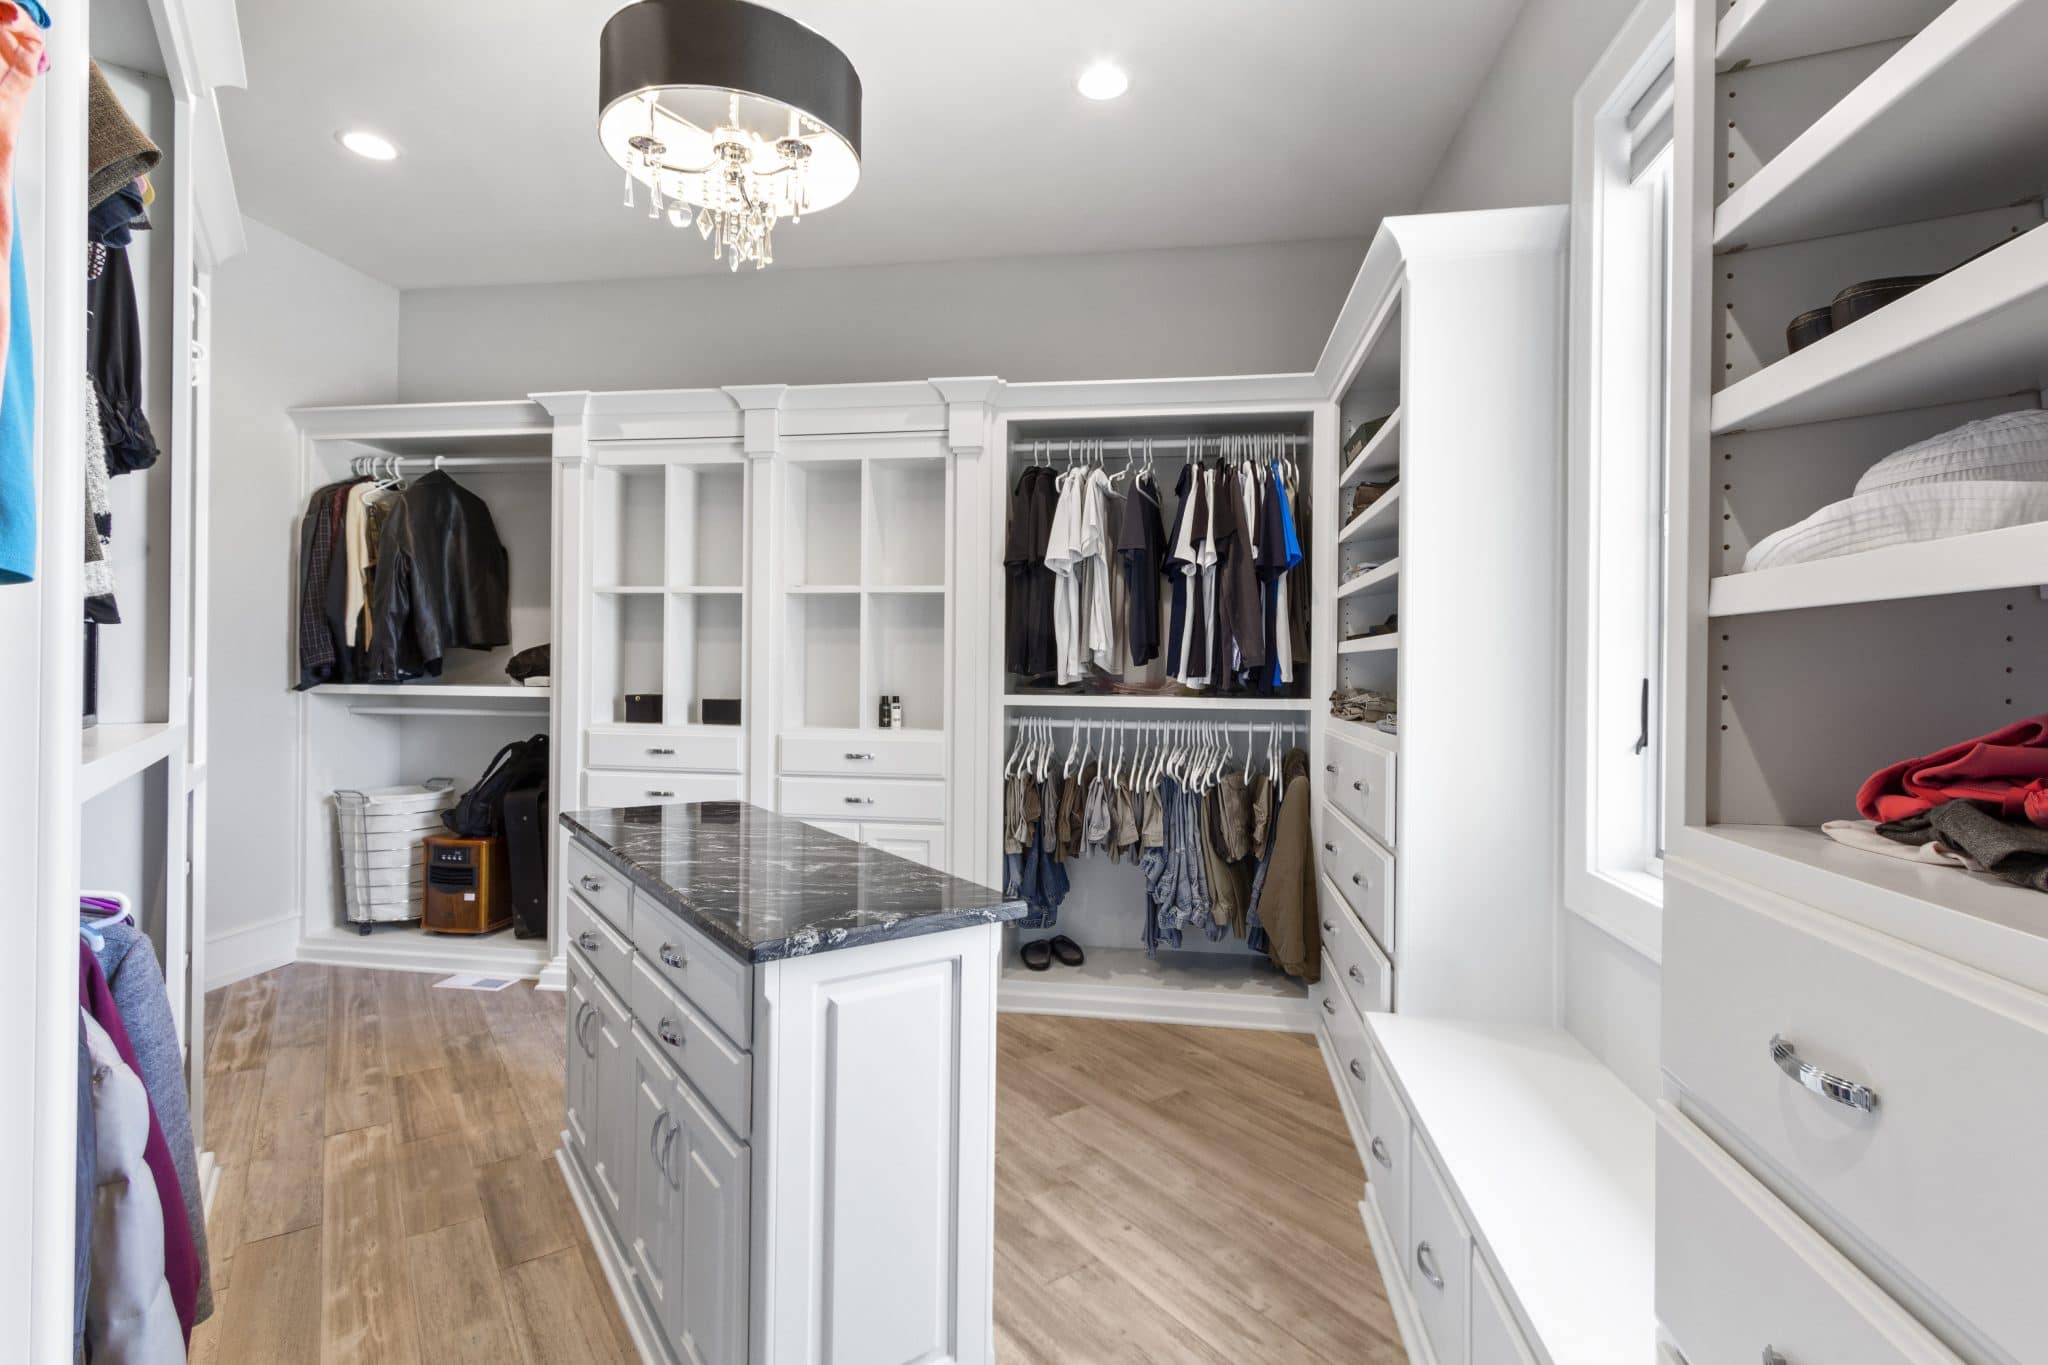 8 Closet Trends for 2021 That Your Clients Will Love - CabinetCorp